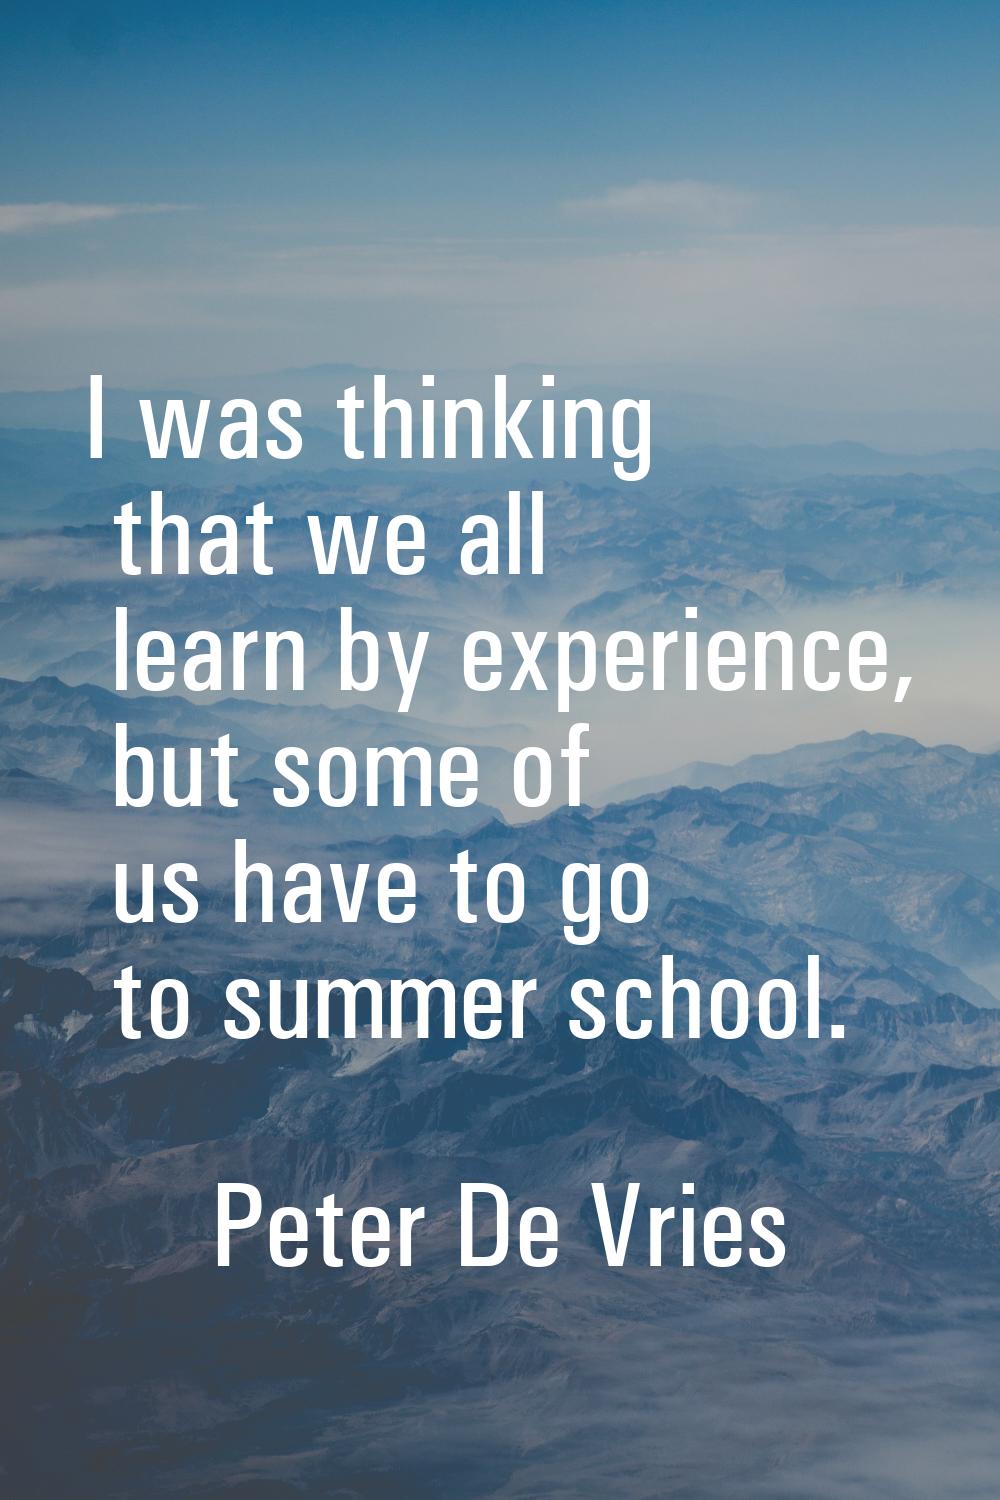 I was thinking that we all learn by experience, but some of us have to go to summer school.